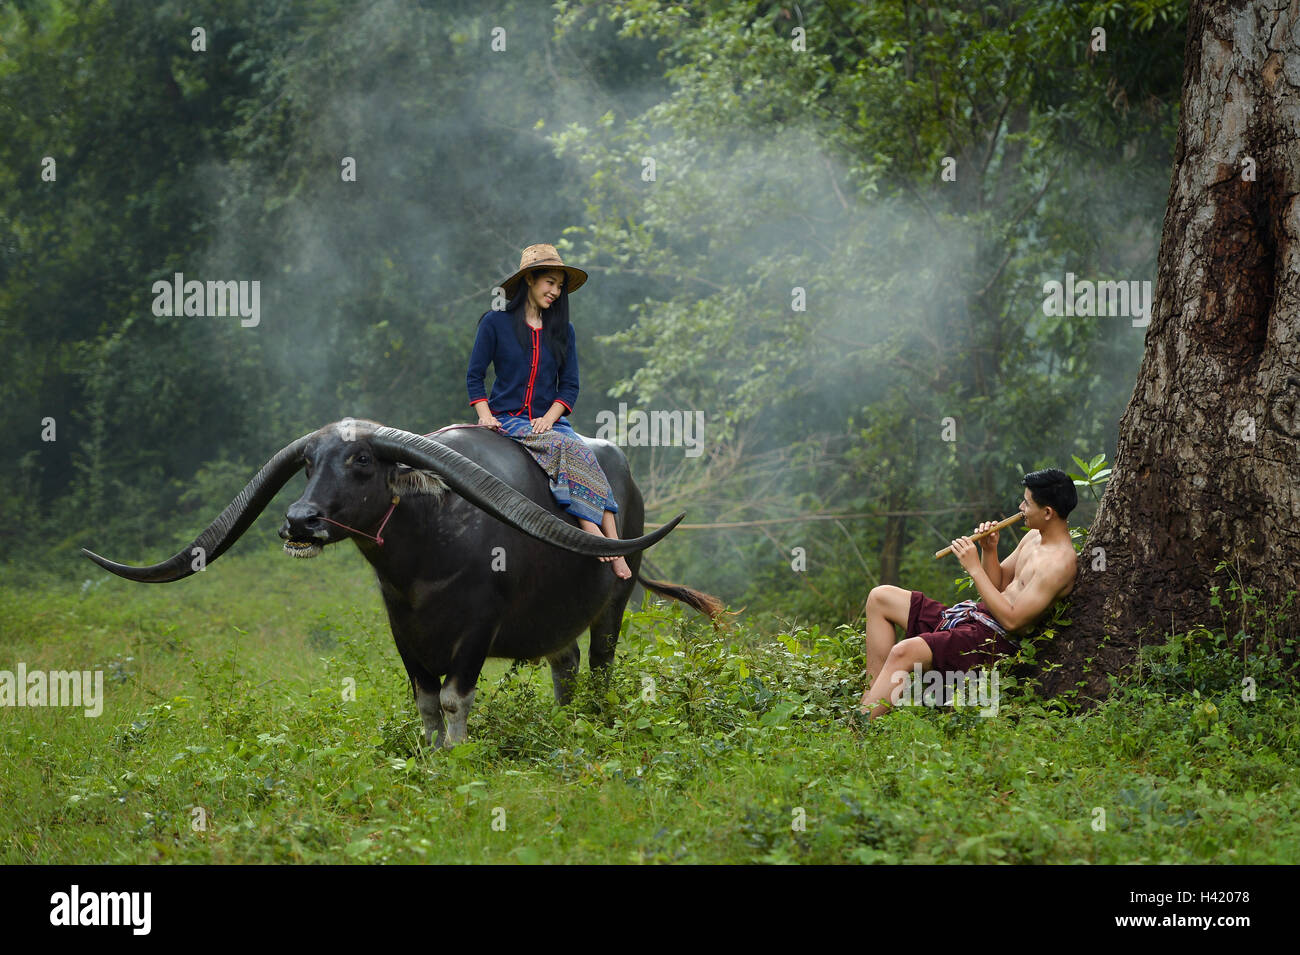 woman sitting on buffalo talking to a man sitting under a tree, thailand Stock Photo